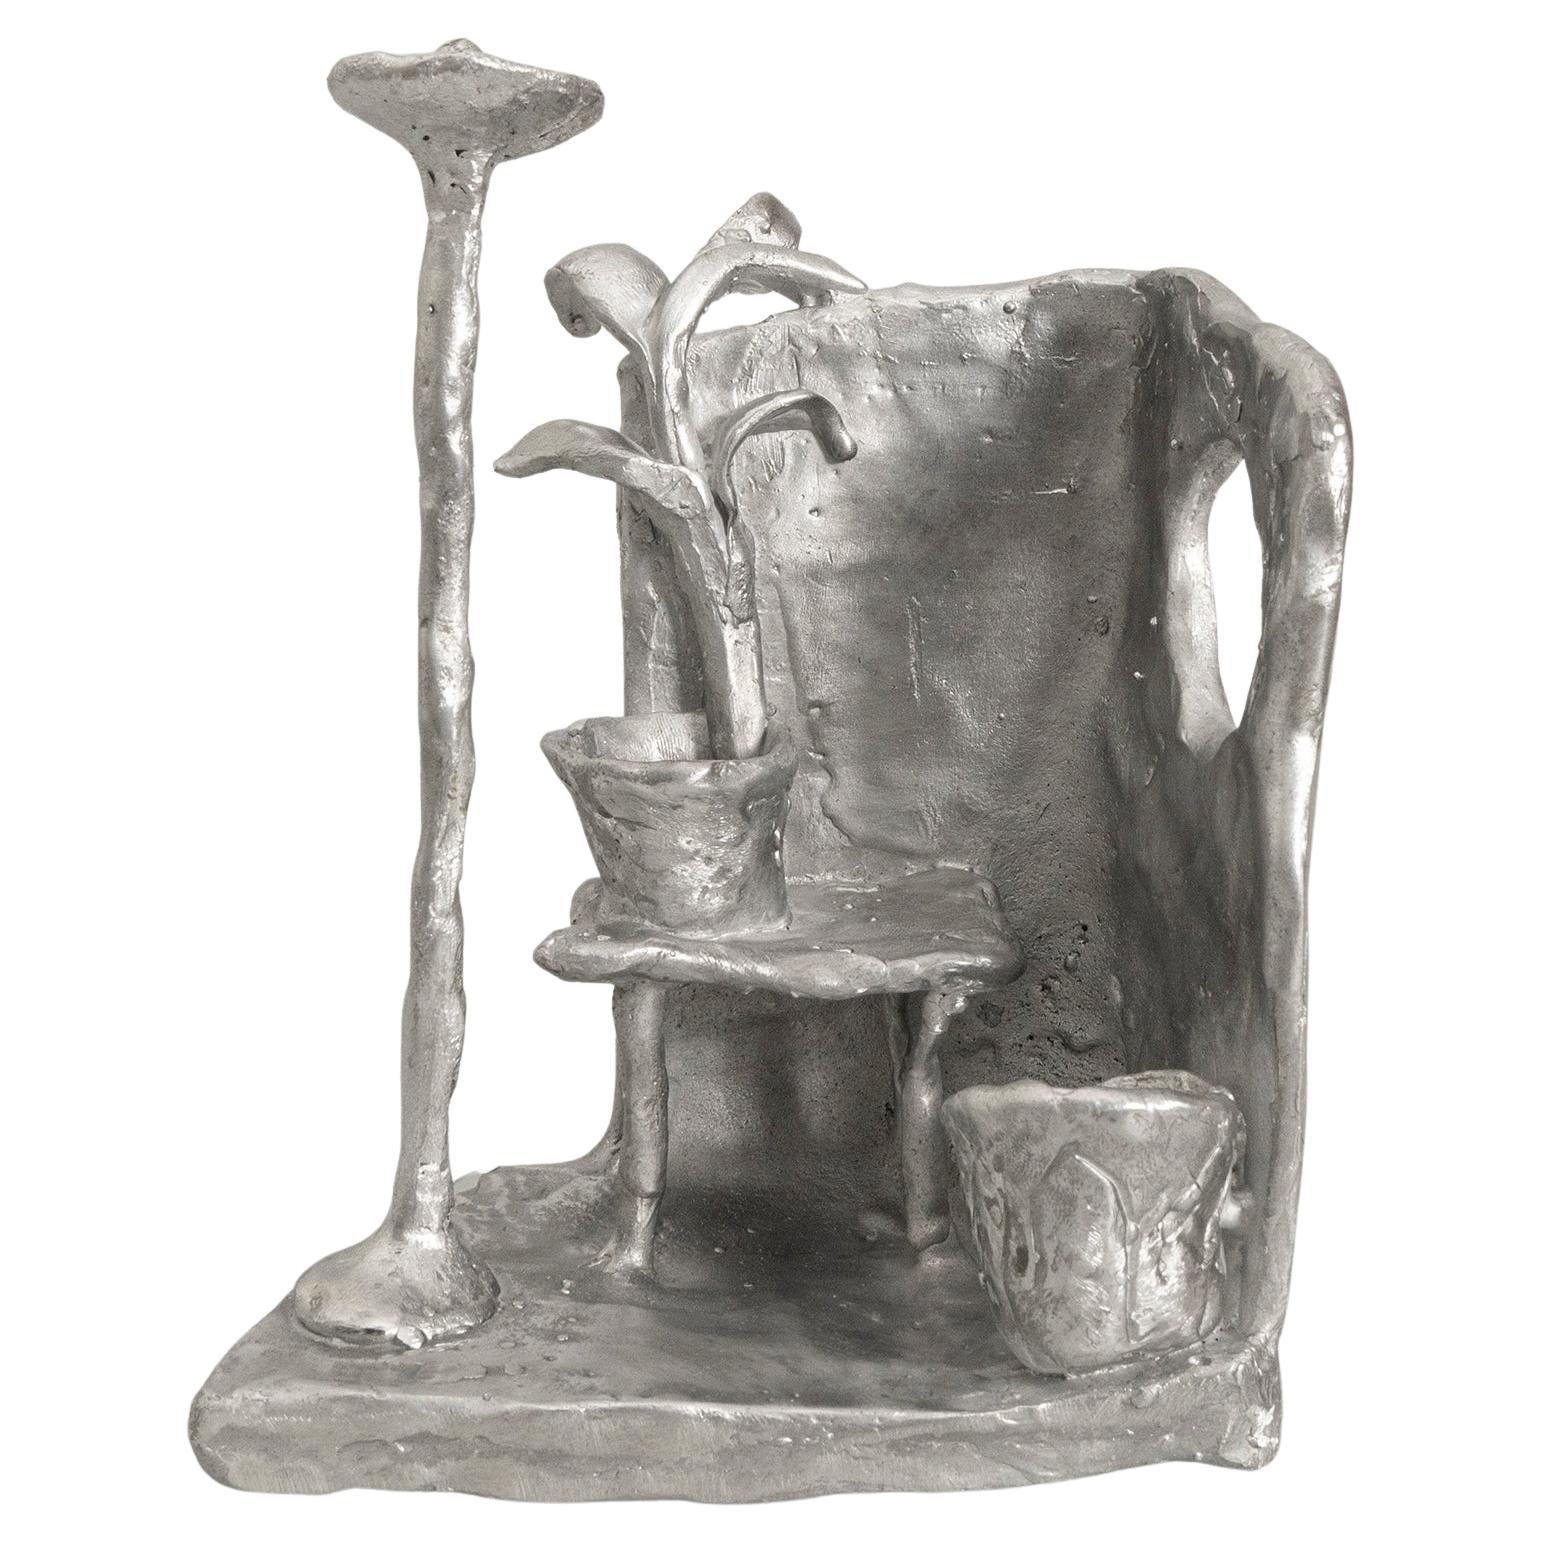 Handmade Aluminium cast sculptural candle holder depicting "Room at Night" For Sale